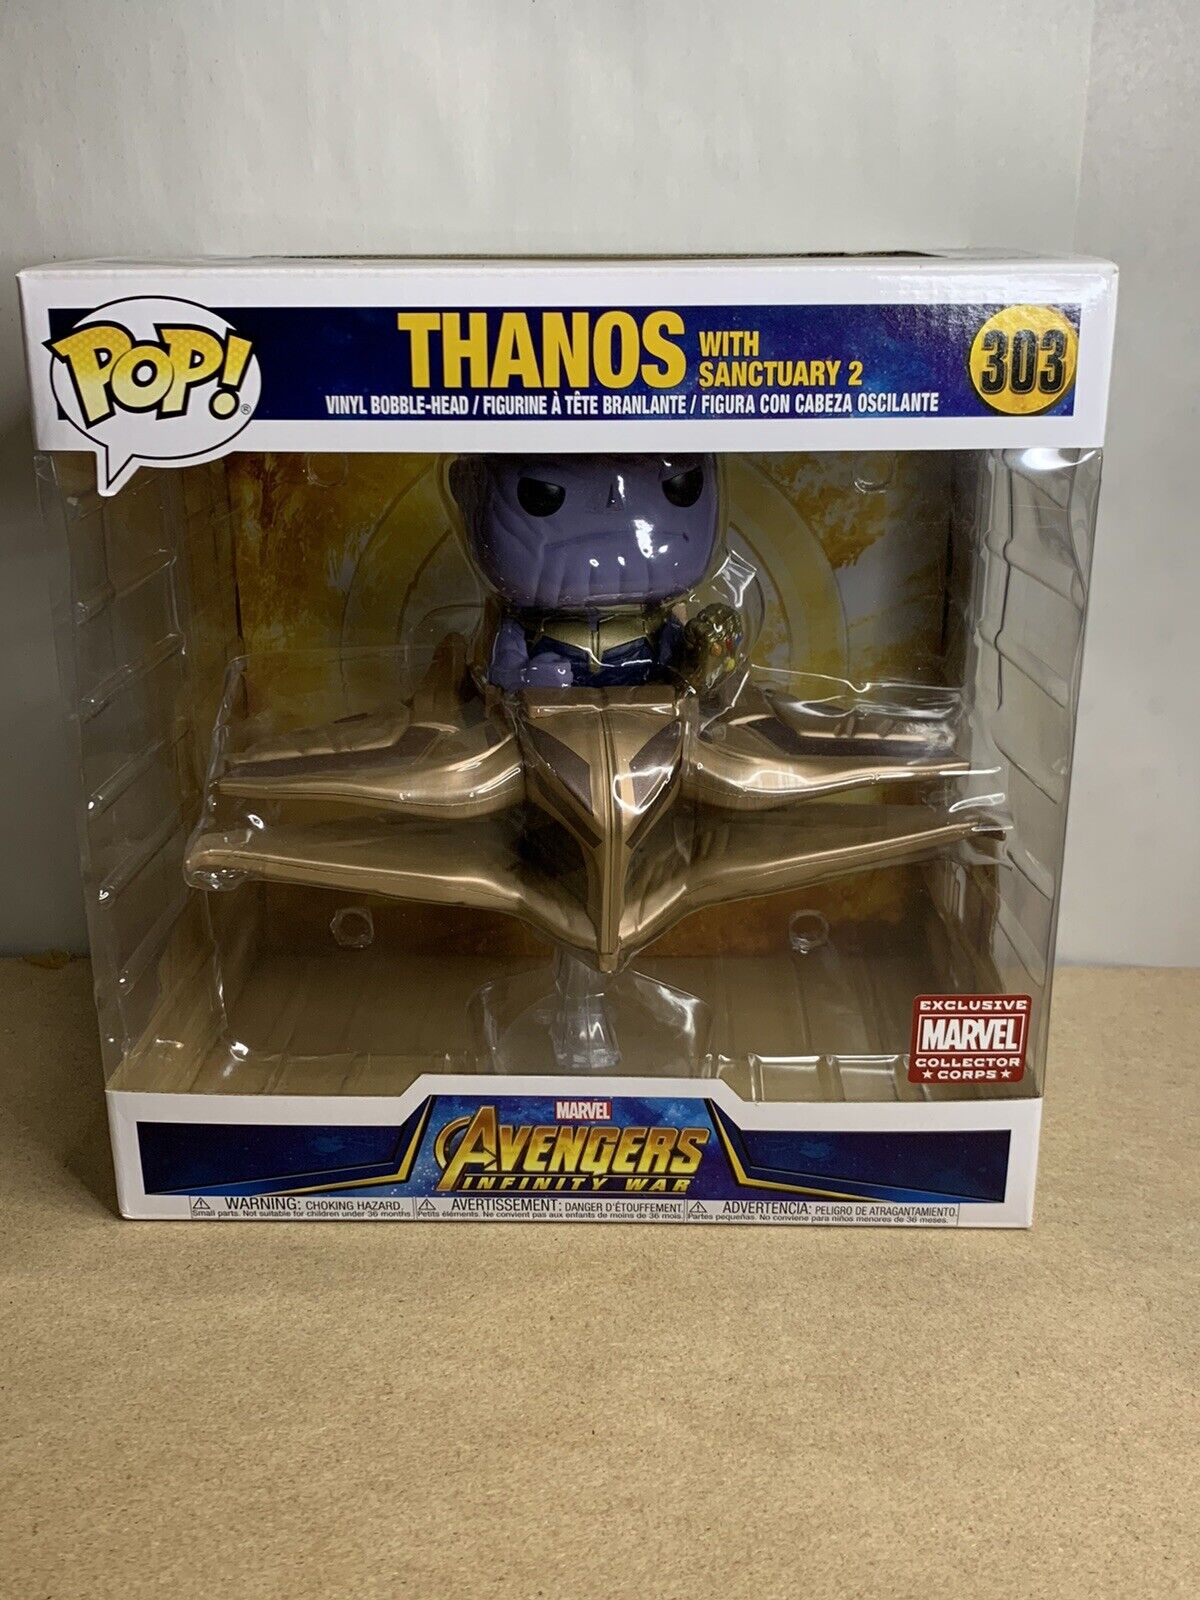 Funko Pop Thanos with Sanctuary 2 #303 (Marvel Collector Corps)